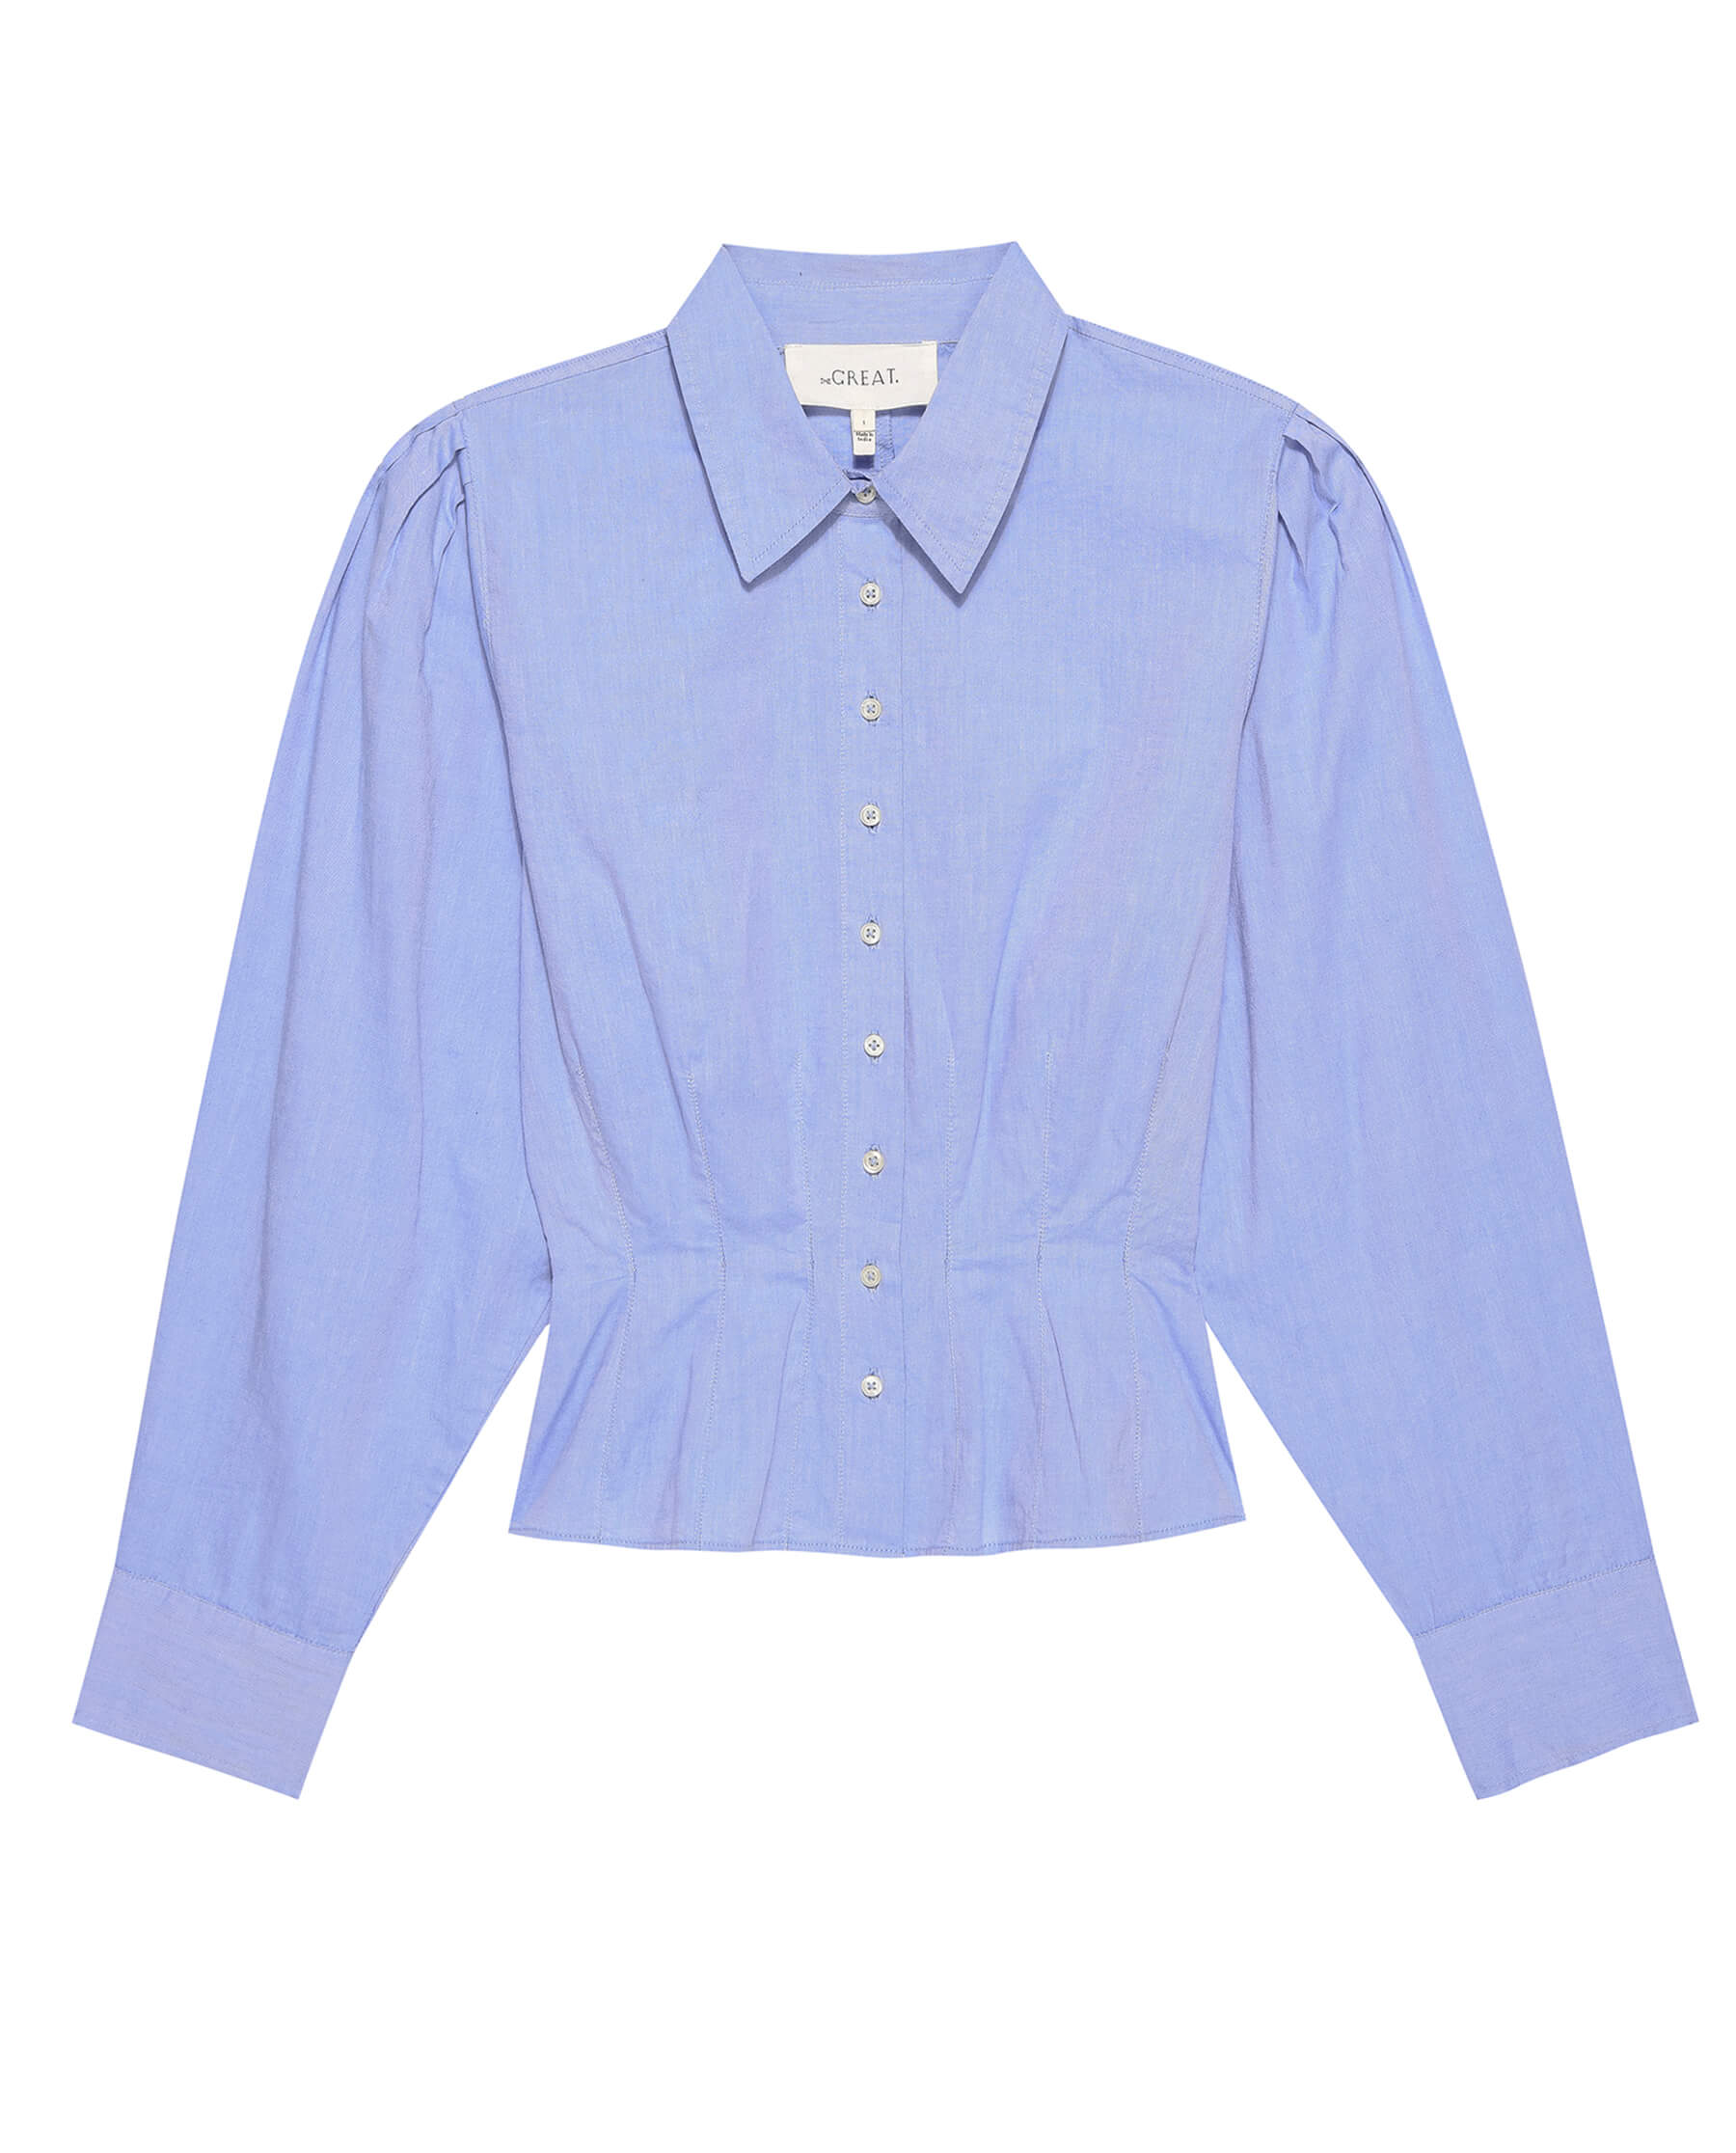 The Honor Top. -- Blue Oxford SHIRTS THE GREAT. HOL 23 D1 SALE